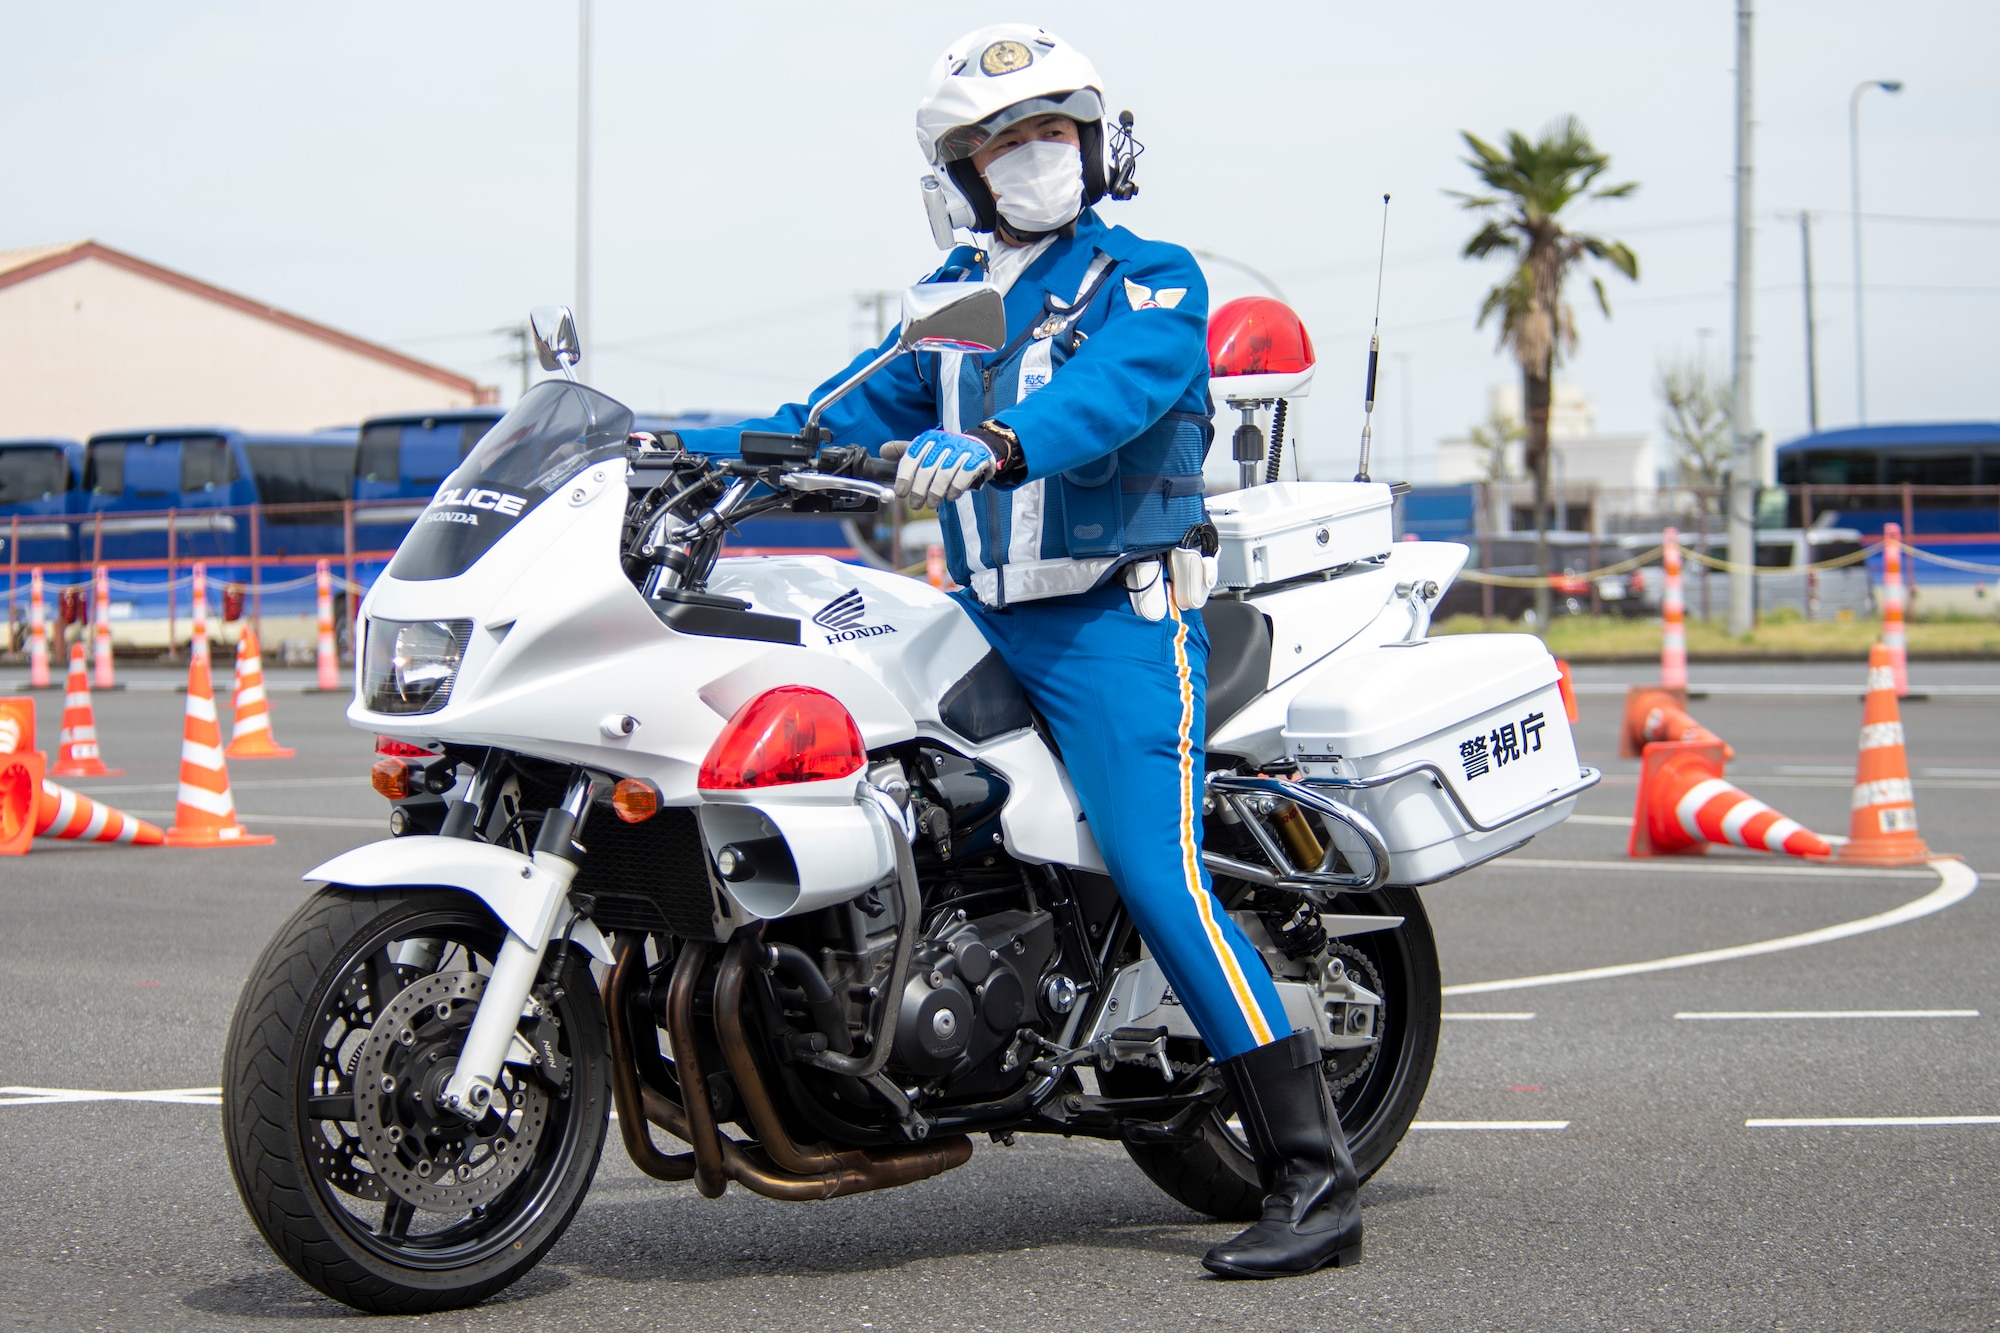 A policeman straddles a motorcycle